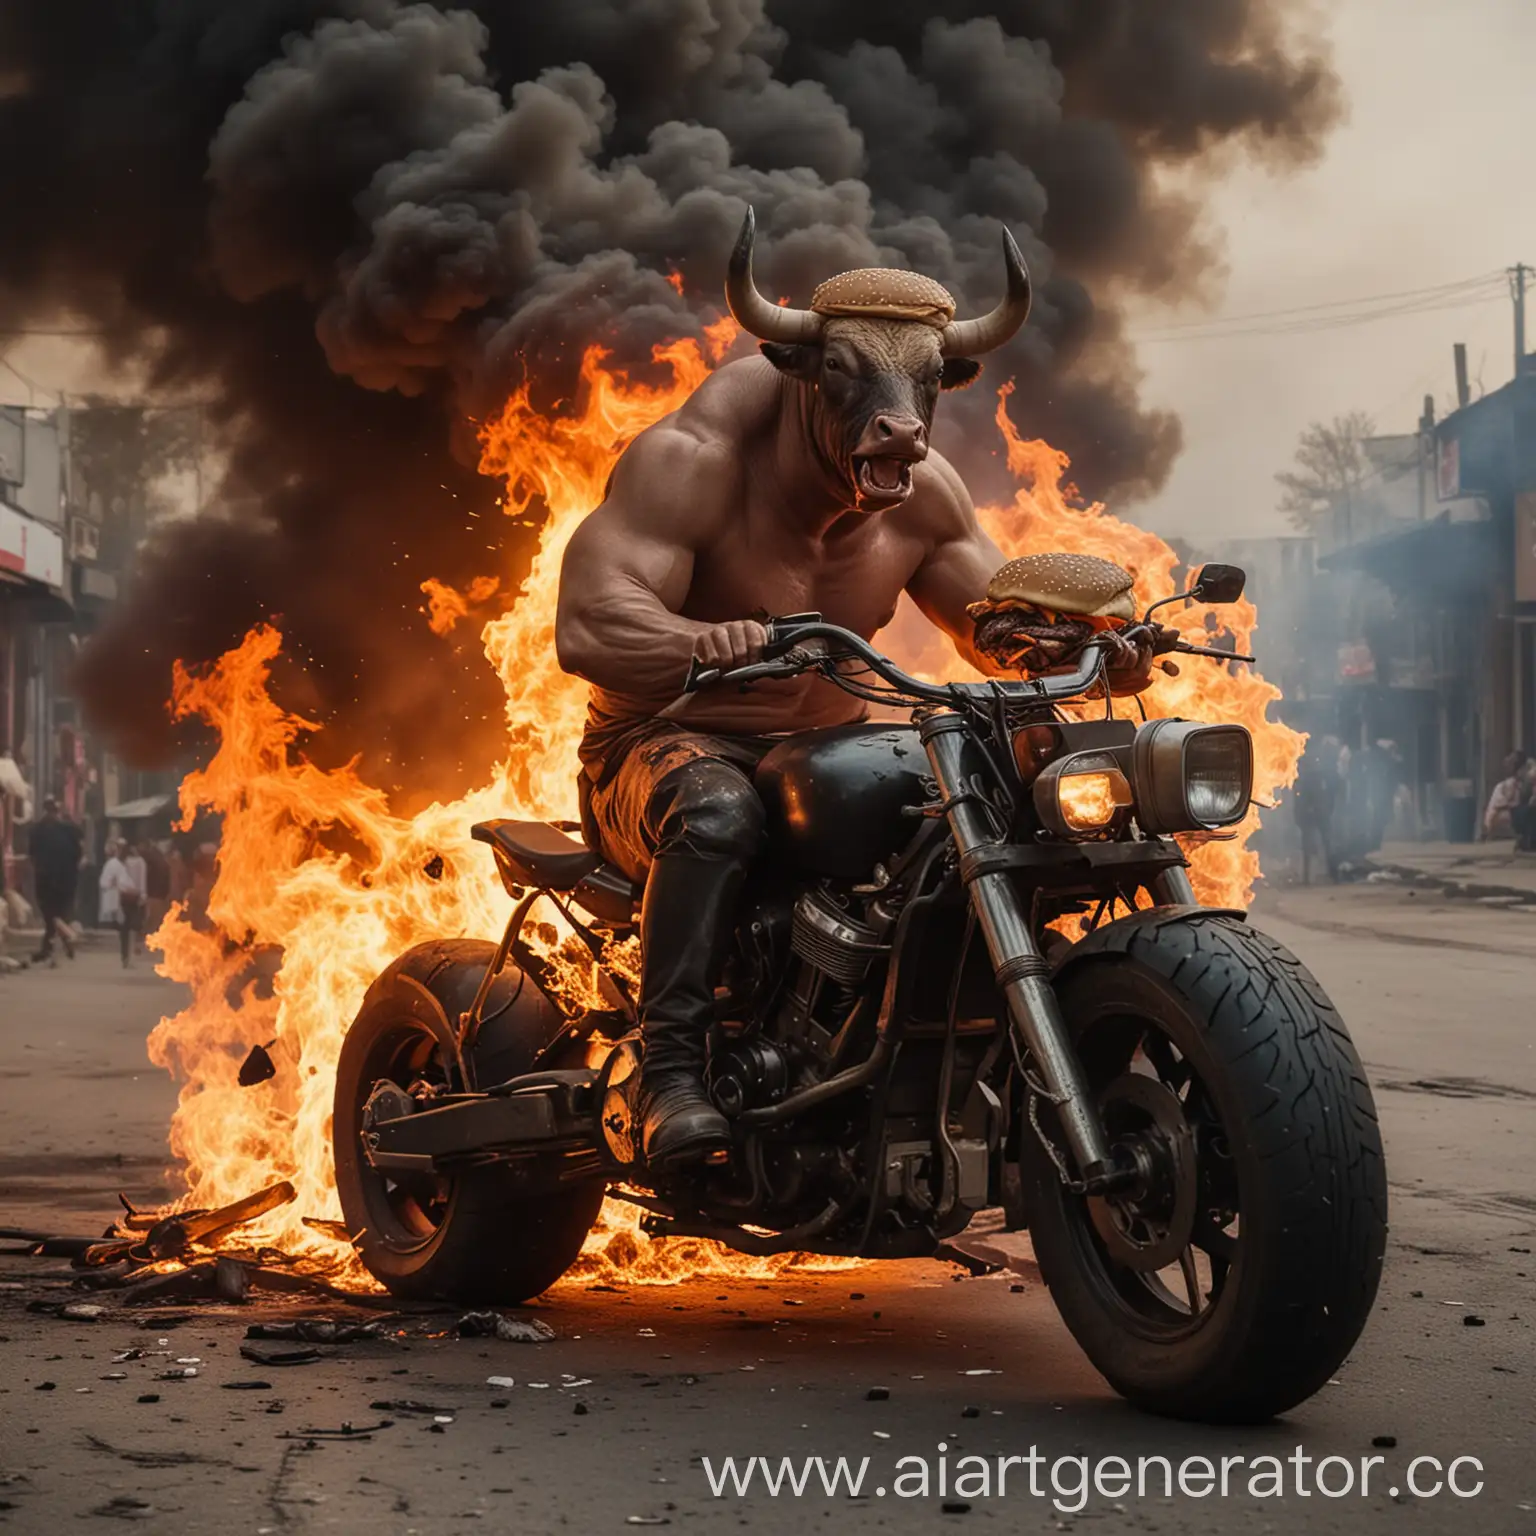 Brutal-Bull-Riding-a-Motorcycle-Through-Flames-with-a-Burger